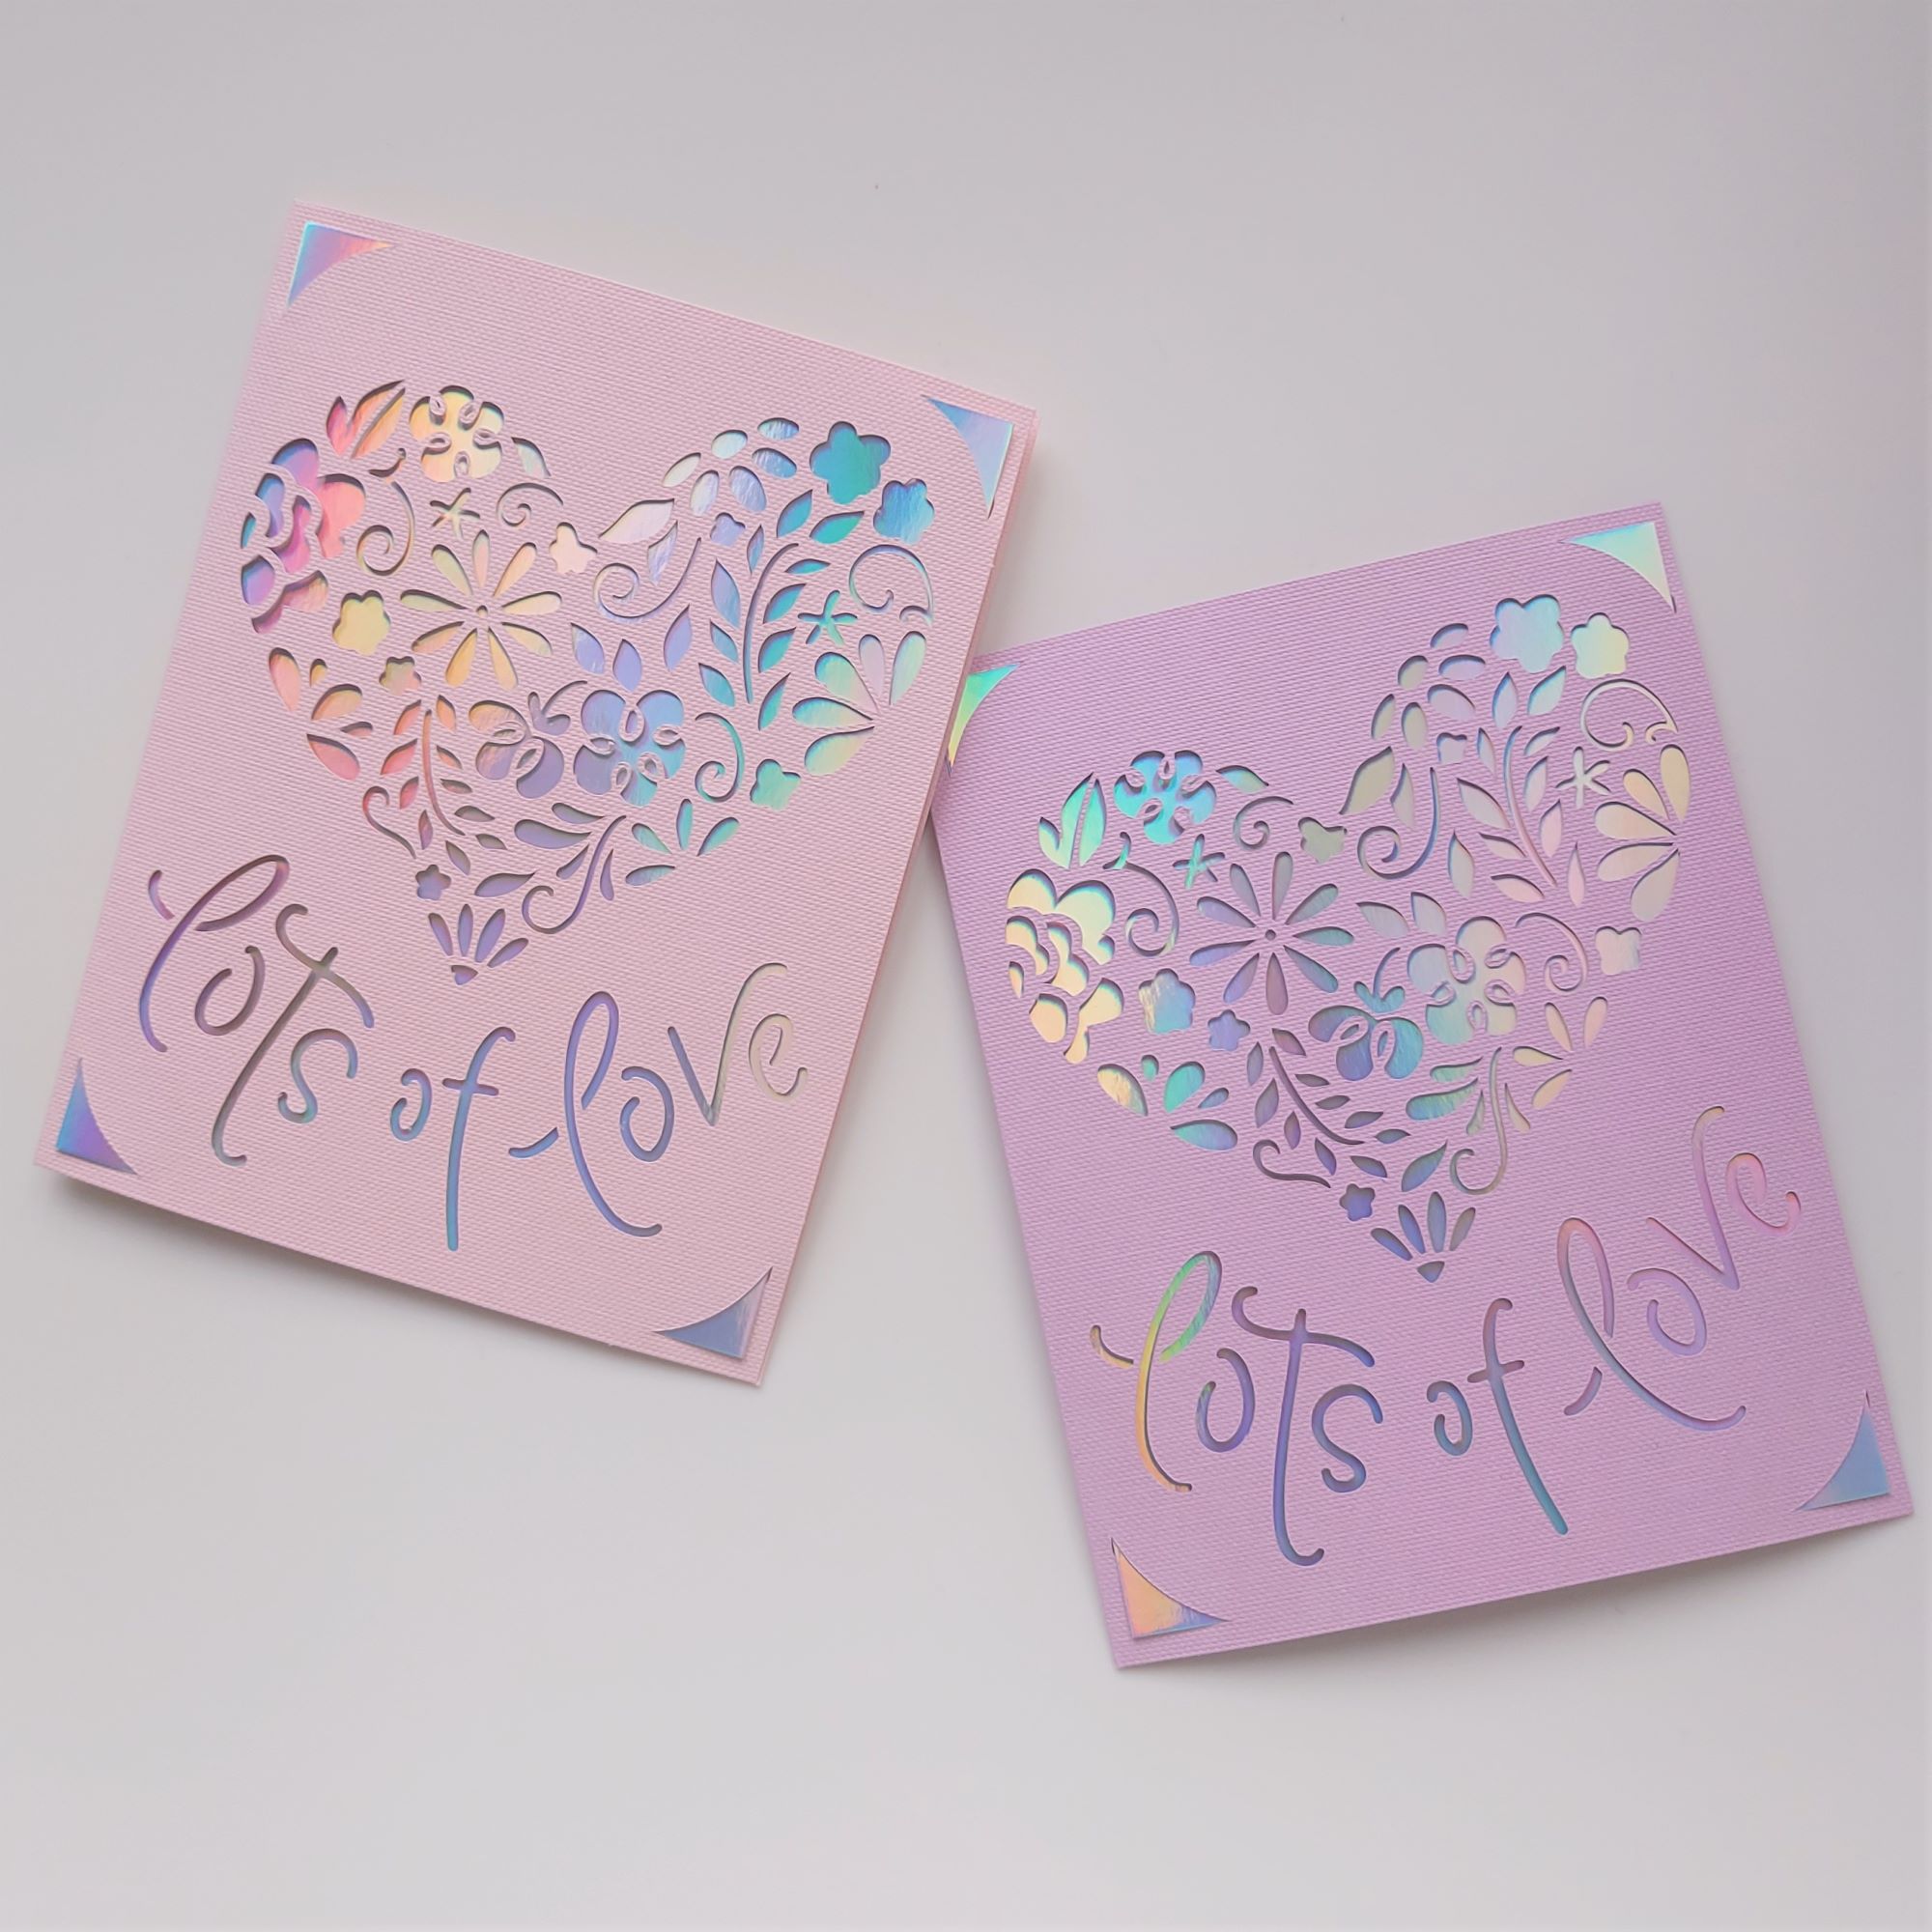 Make Cards for Any Occasion with the Cricut Joy Card Mat - Lydi Out Loud